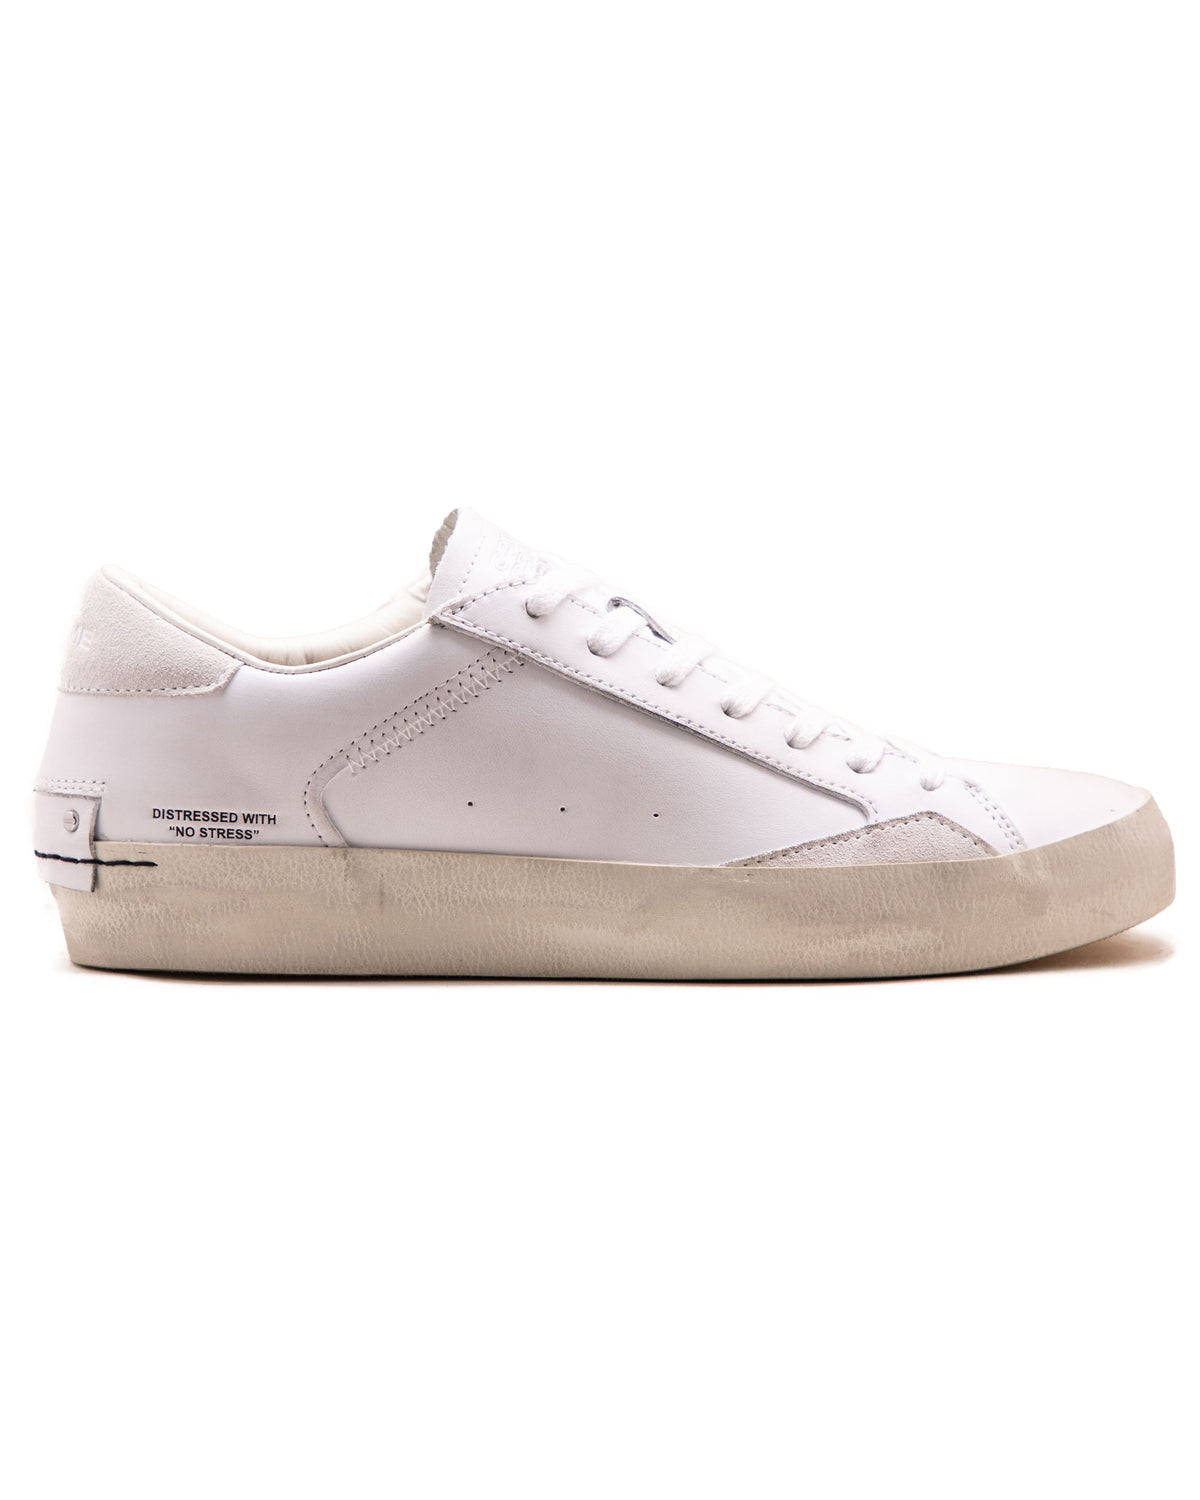 Crime London Low Top Distressed White